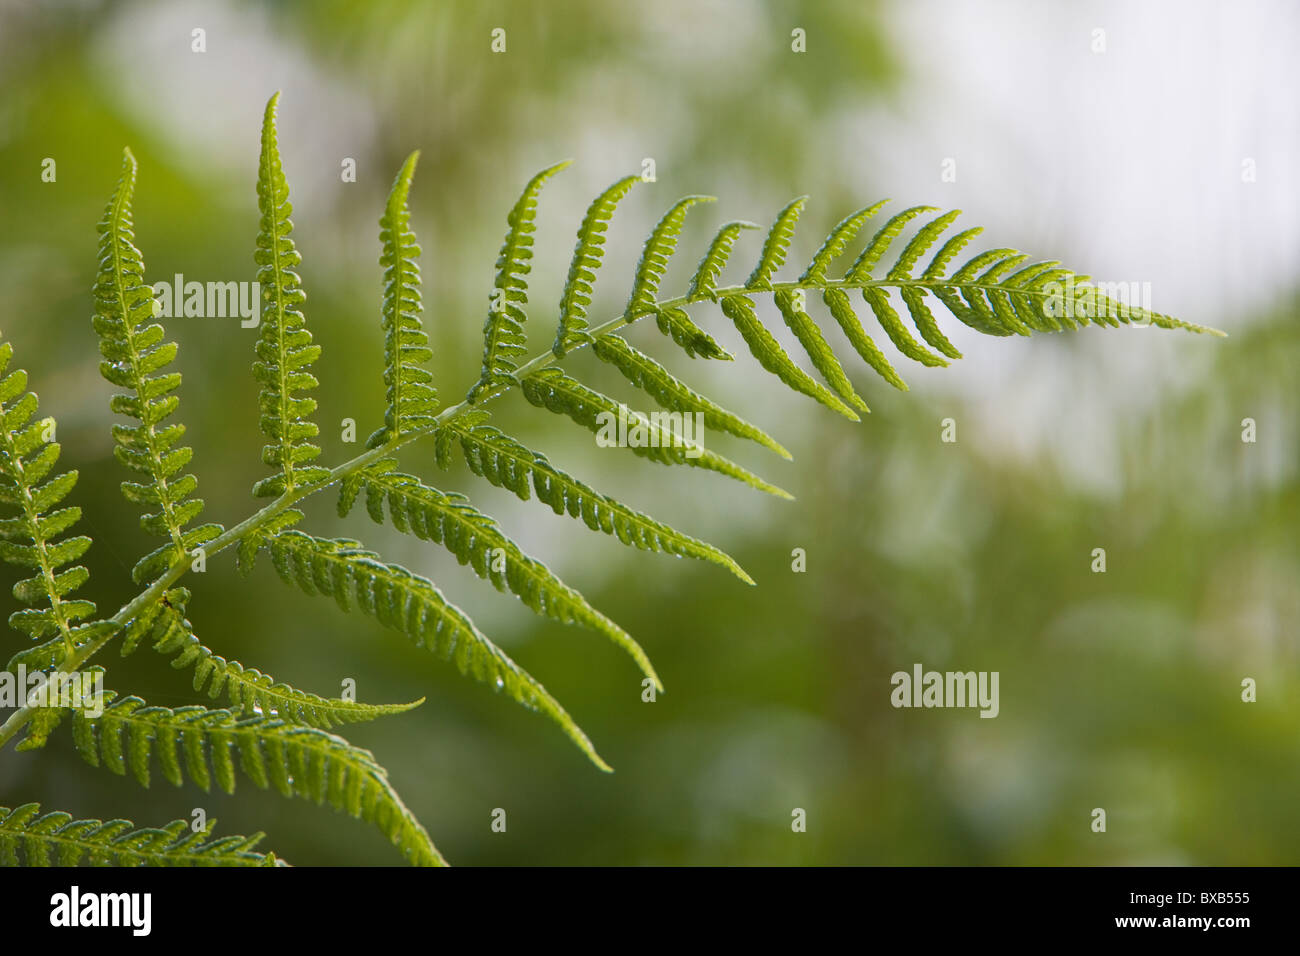 Young  fern leaf, close-up Stock Photo